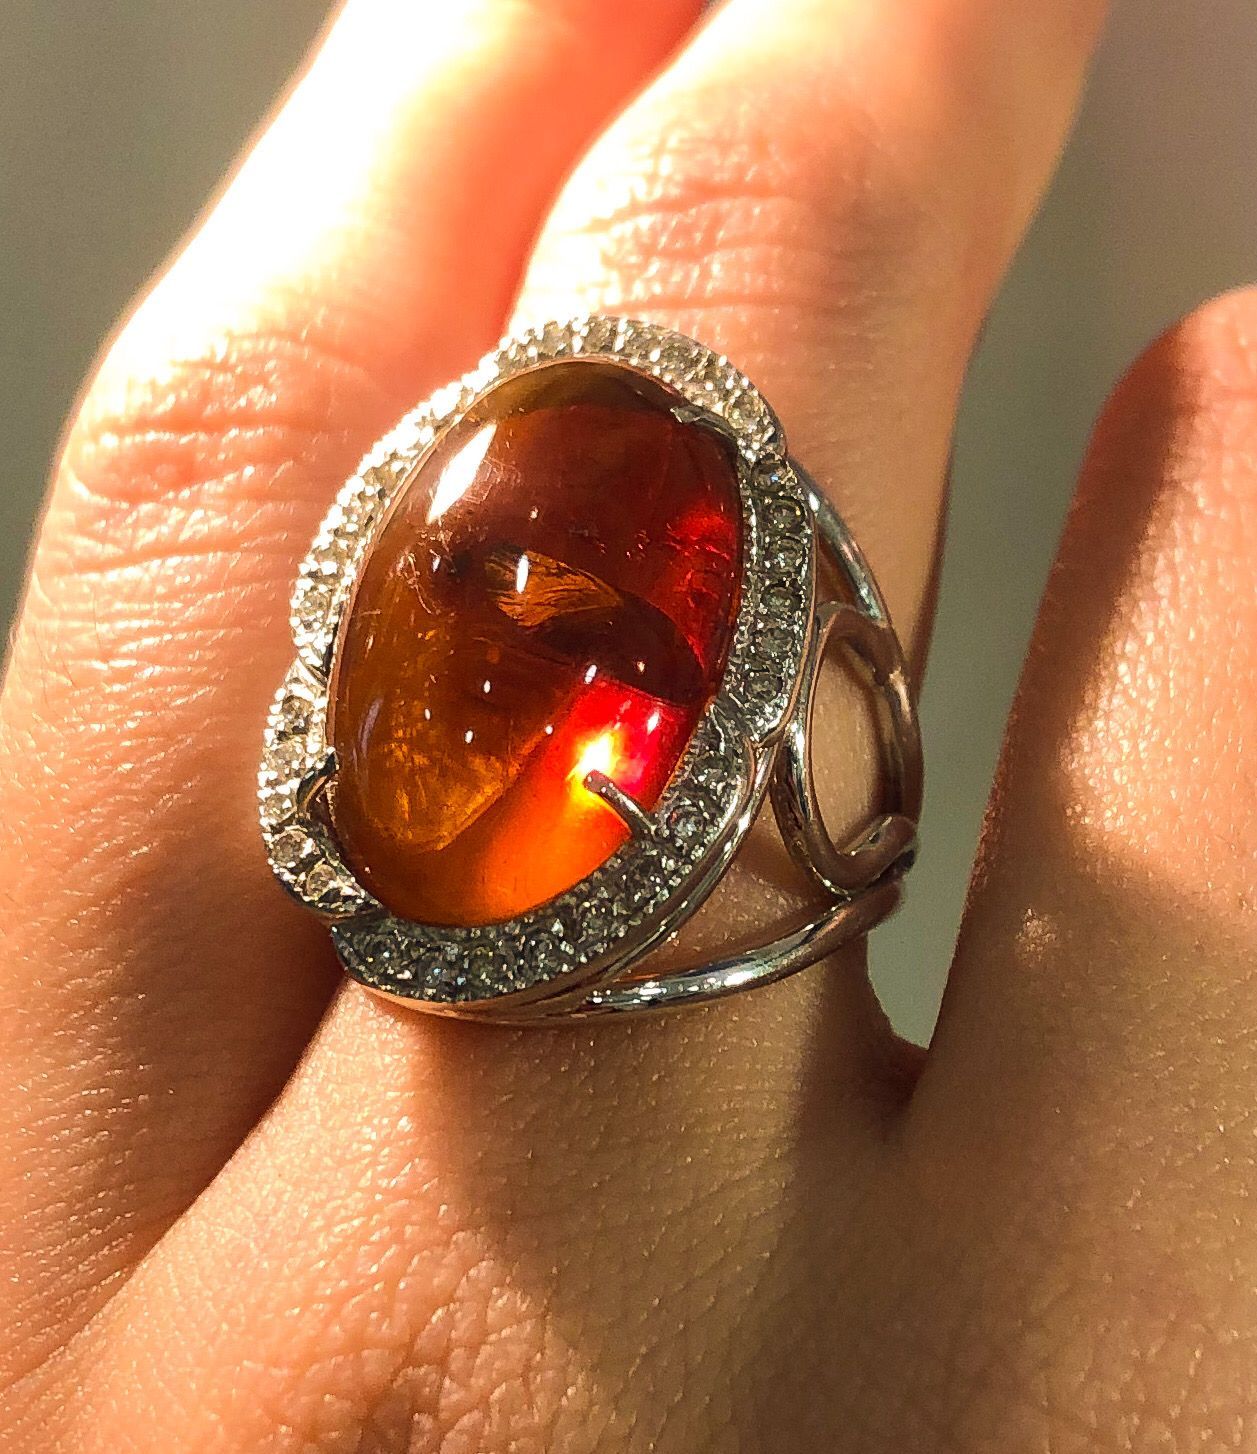 Null 18 kt gold ring with amber and diamonds. Diamonds weighing . About 0.30 ct.&hellip;